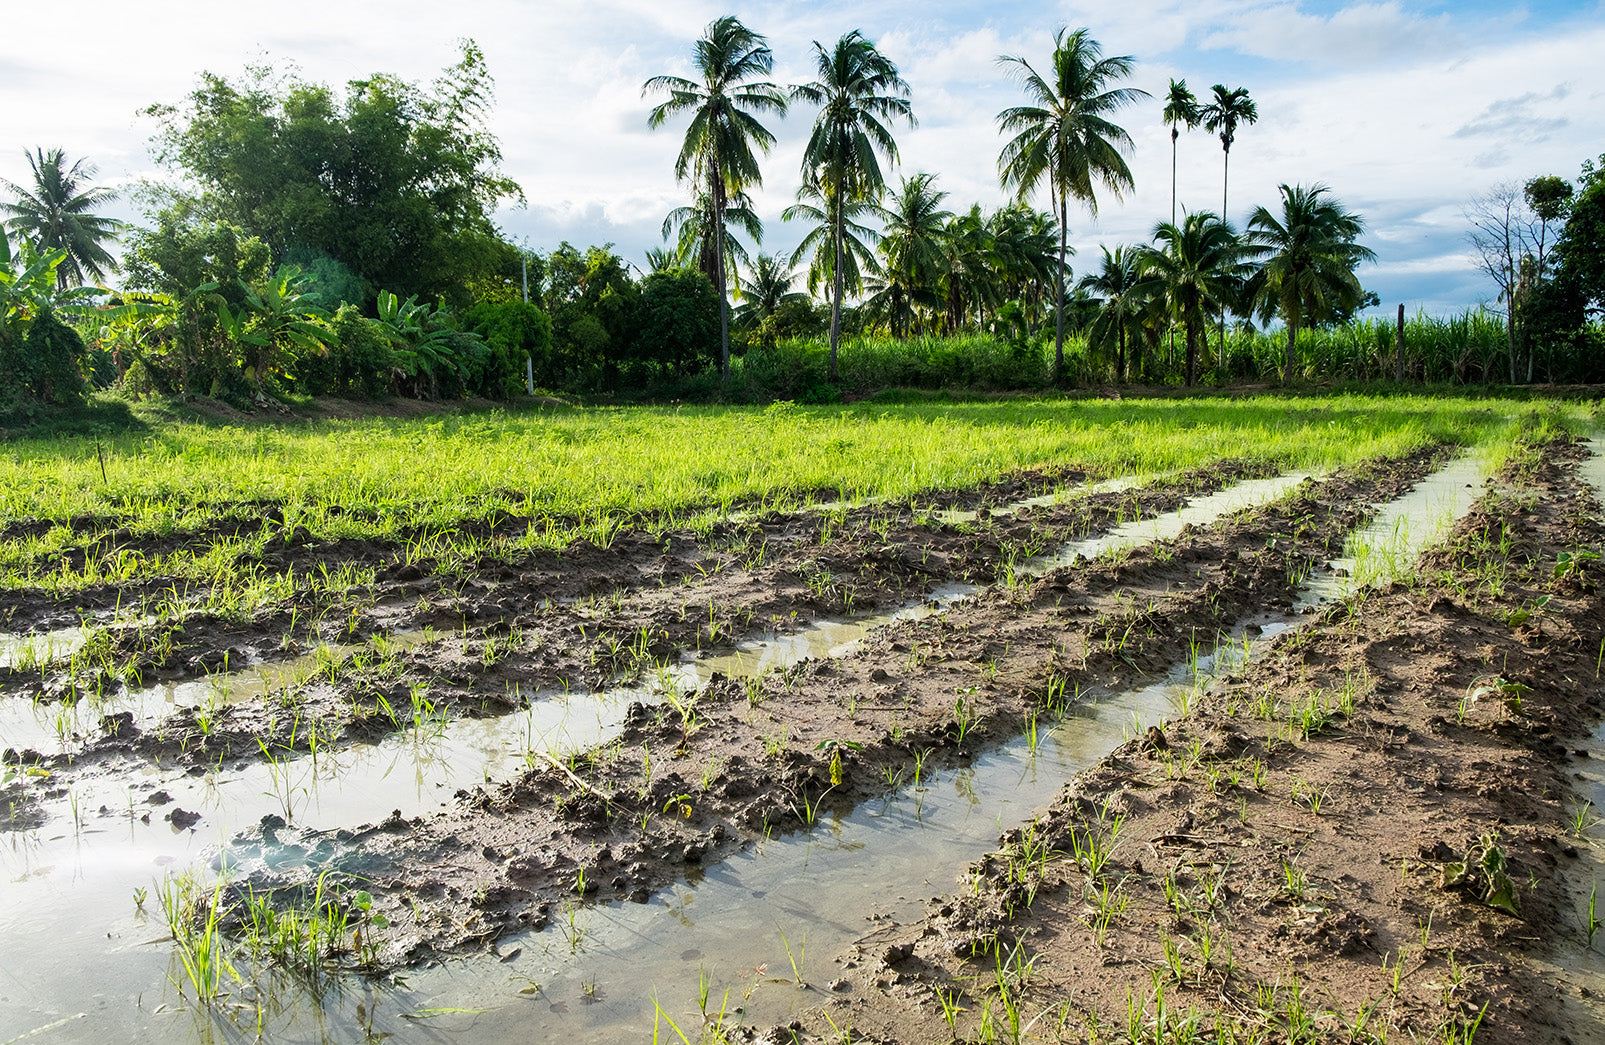 The Step-by-Step Guide to Land Preparation for Successful Coconut Farming